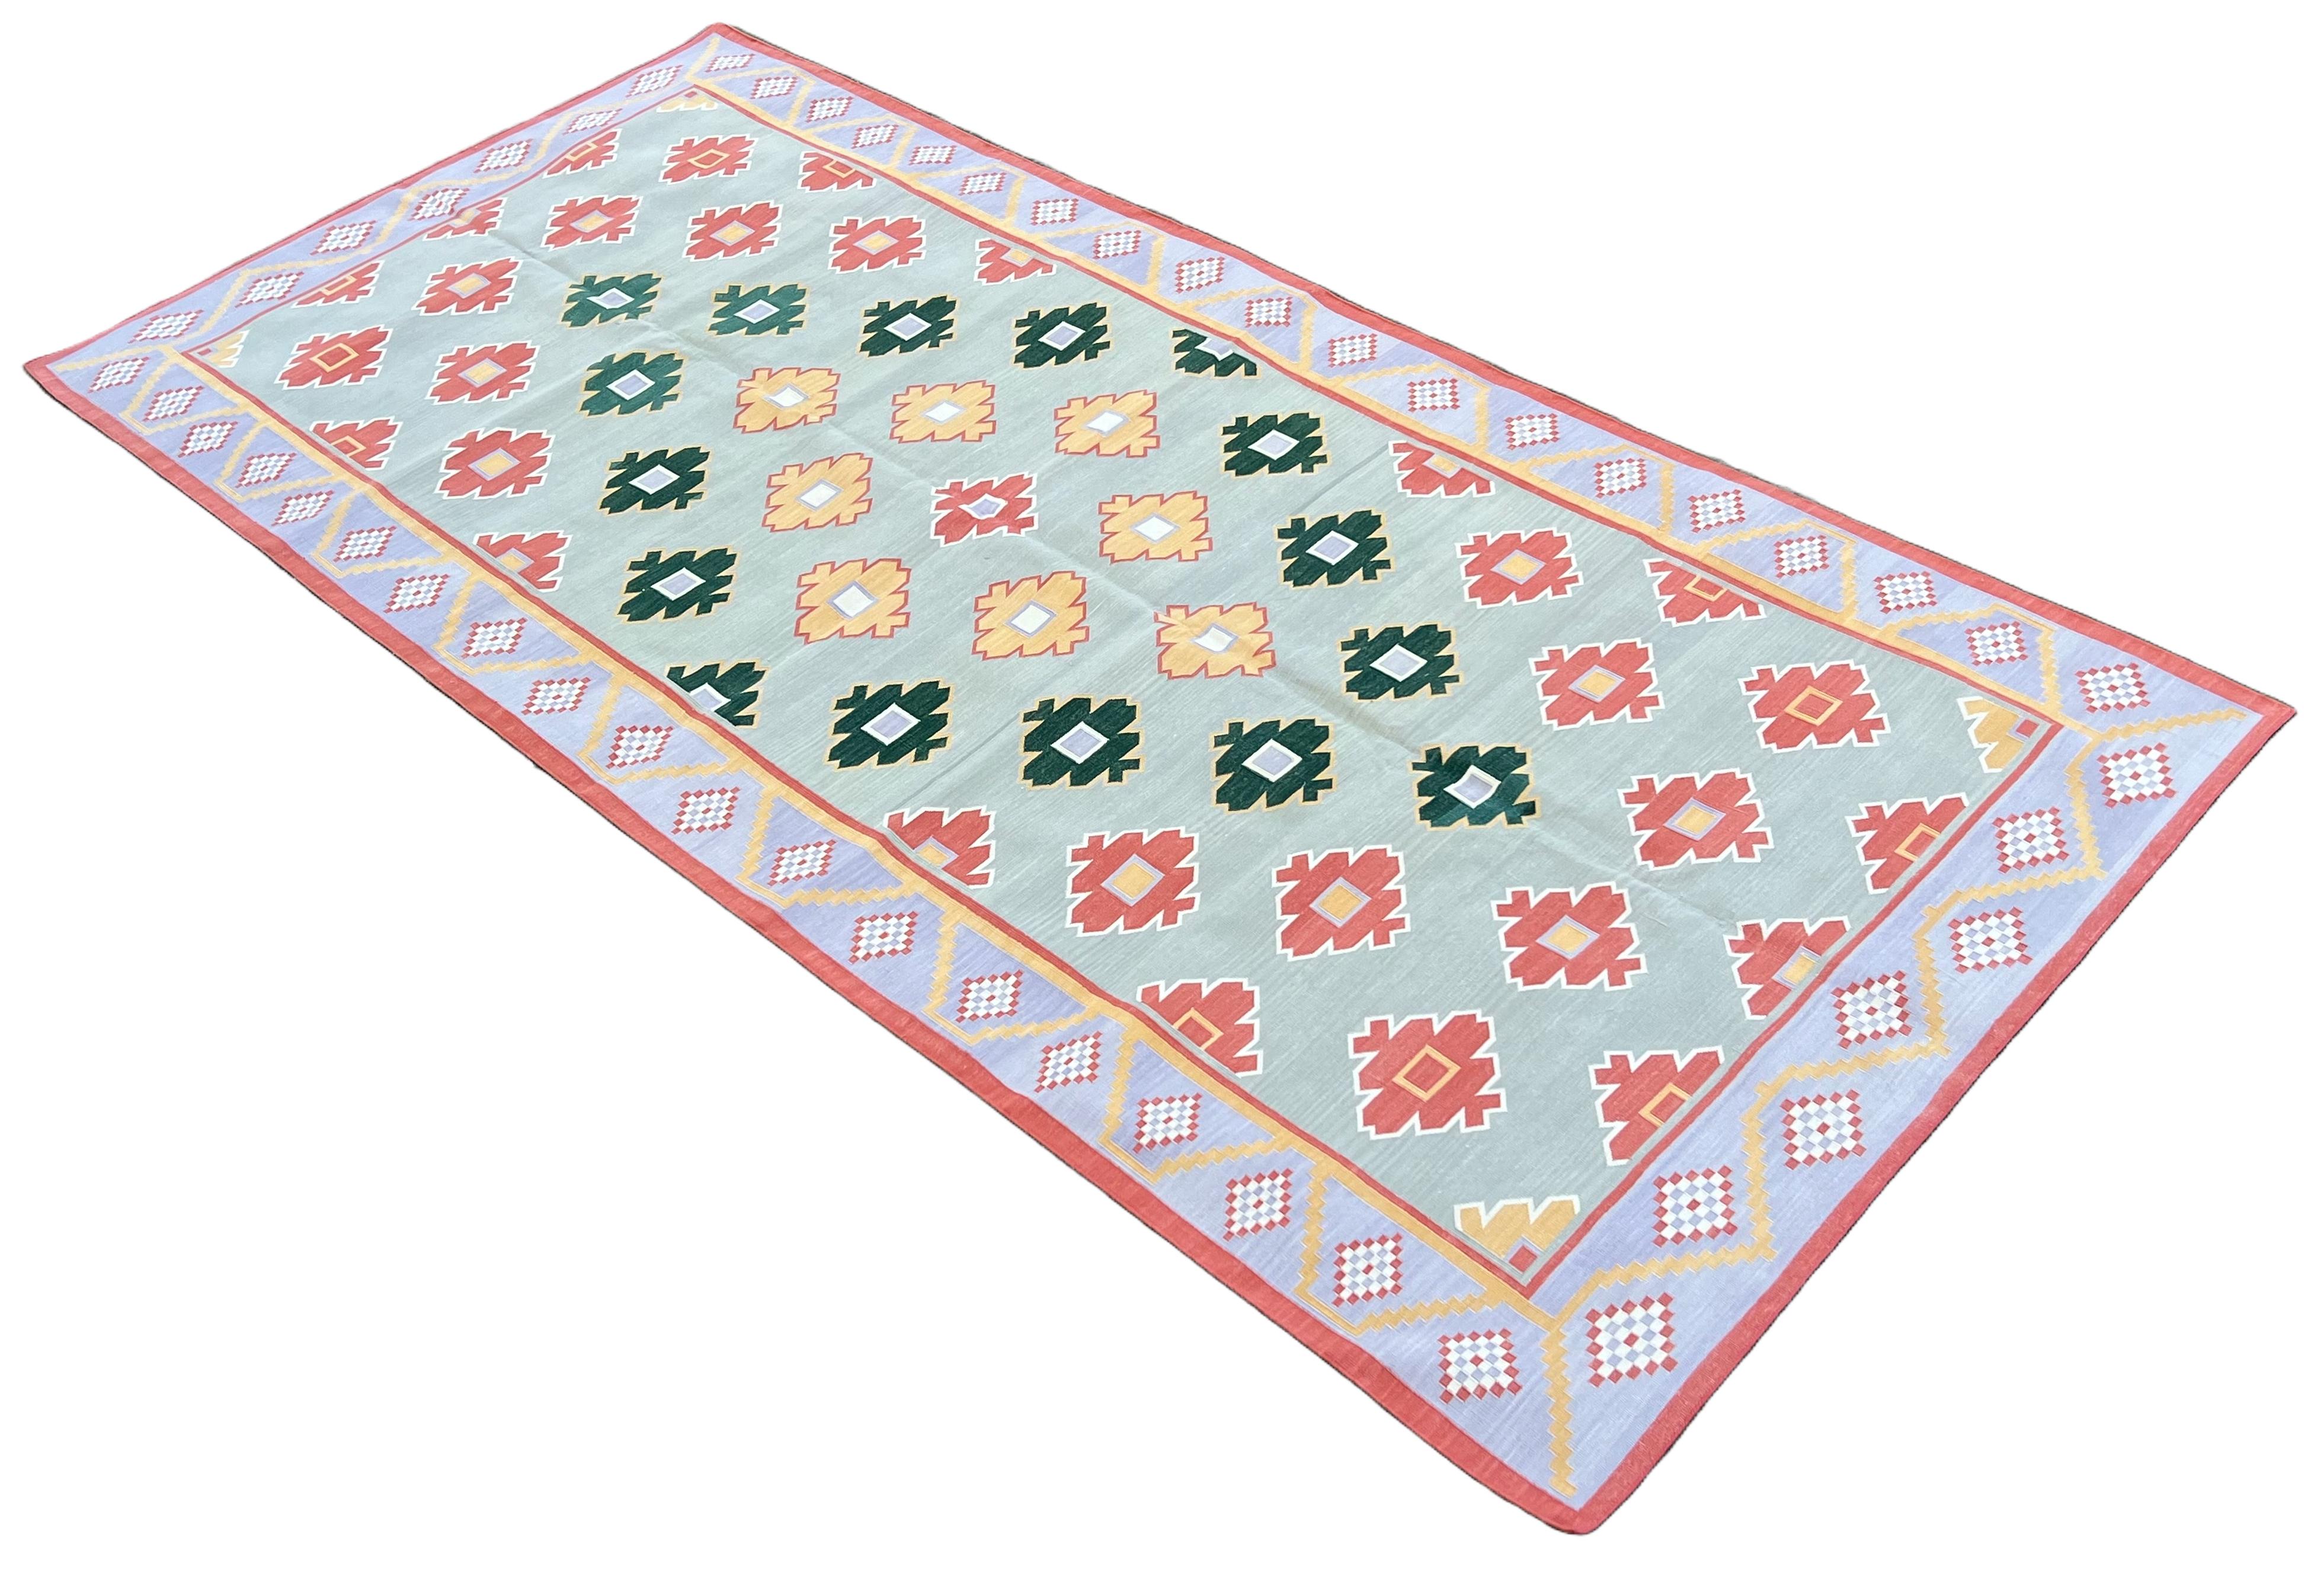 Cotton Vegetable Dyed Reversible Grey, Coral, Lavender, Green & Mustard Geometric Patterned Star 
Indian Rug - 6'x12'
These special flat-weave dhurries are hand-woven with 15 ply 100% cotton yarn. Due to the special manufacturing techniques used to